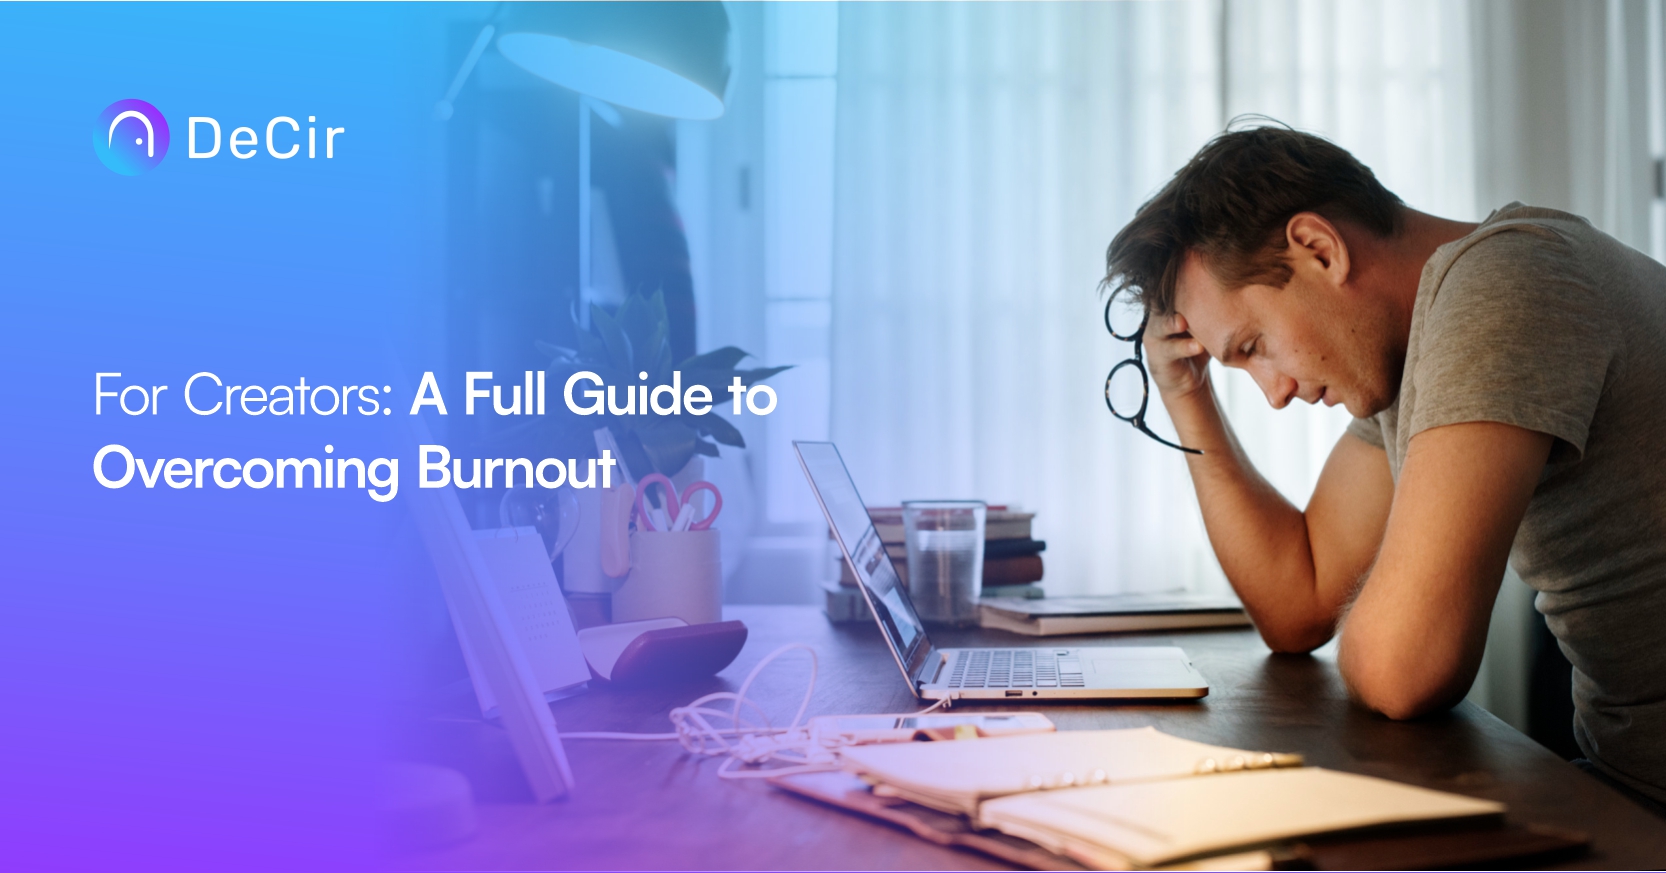 For Creators: A Full Guide to Overcoming Burnout